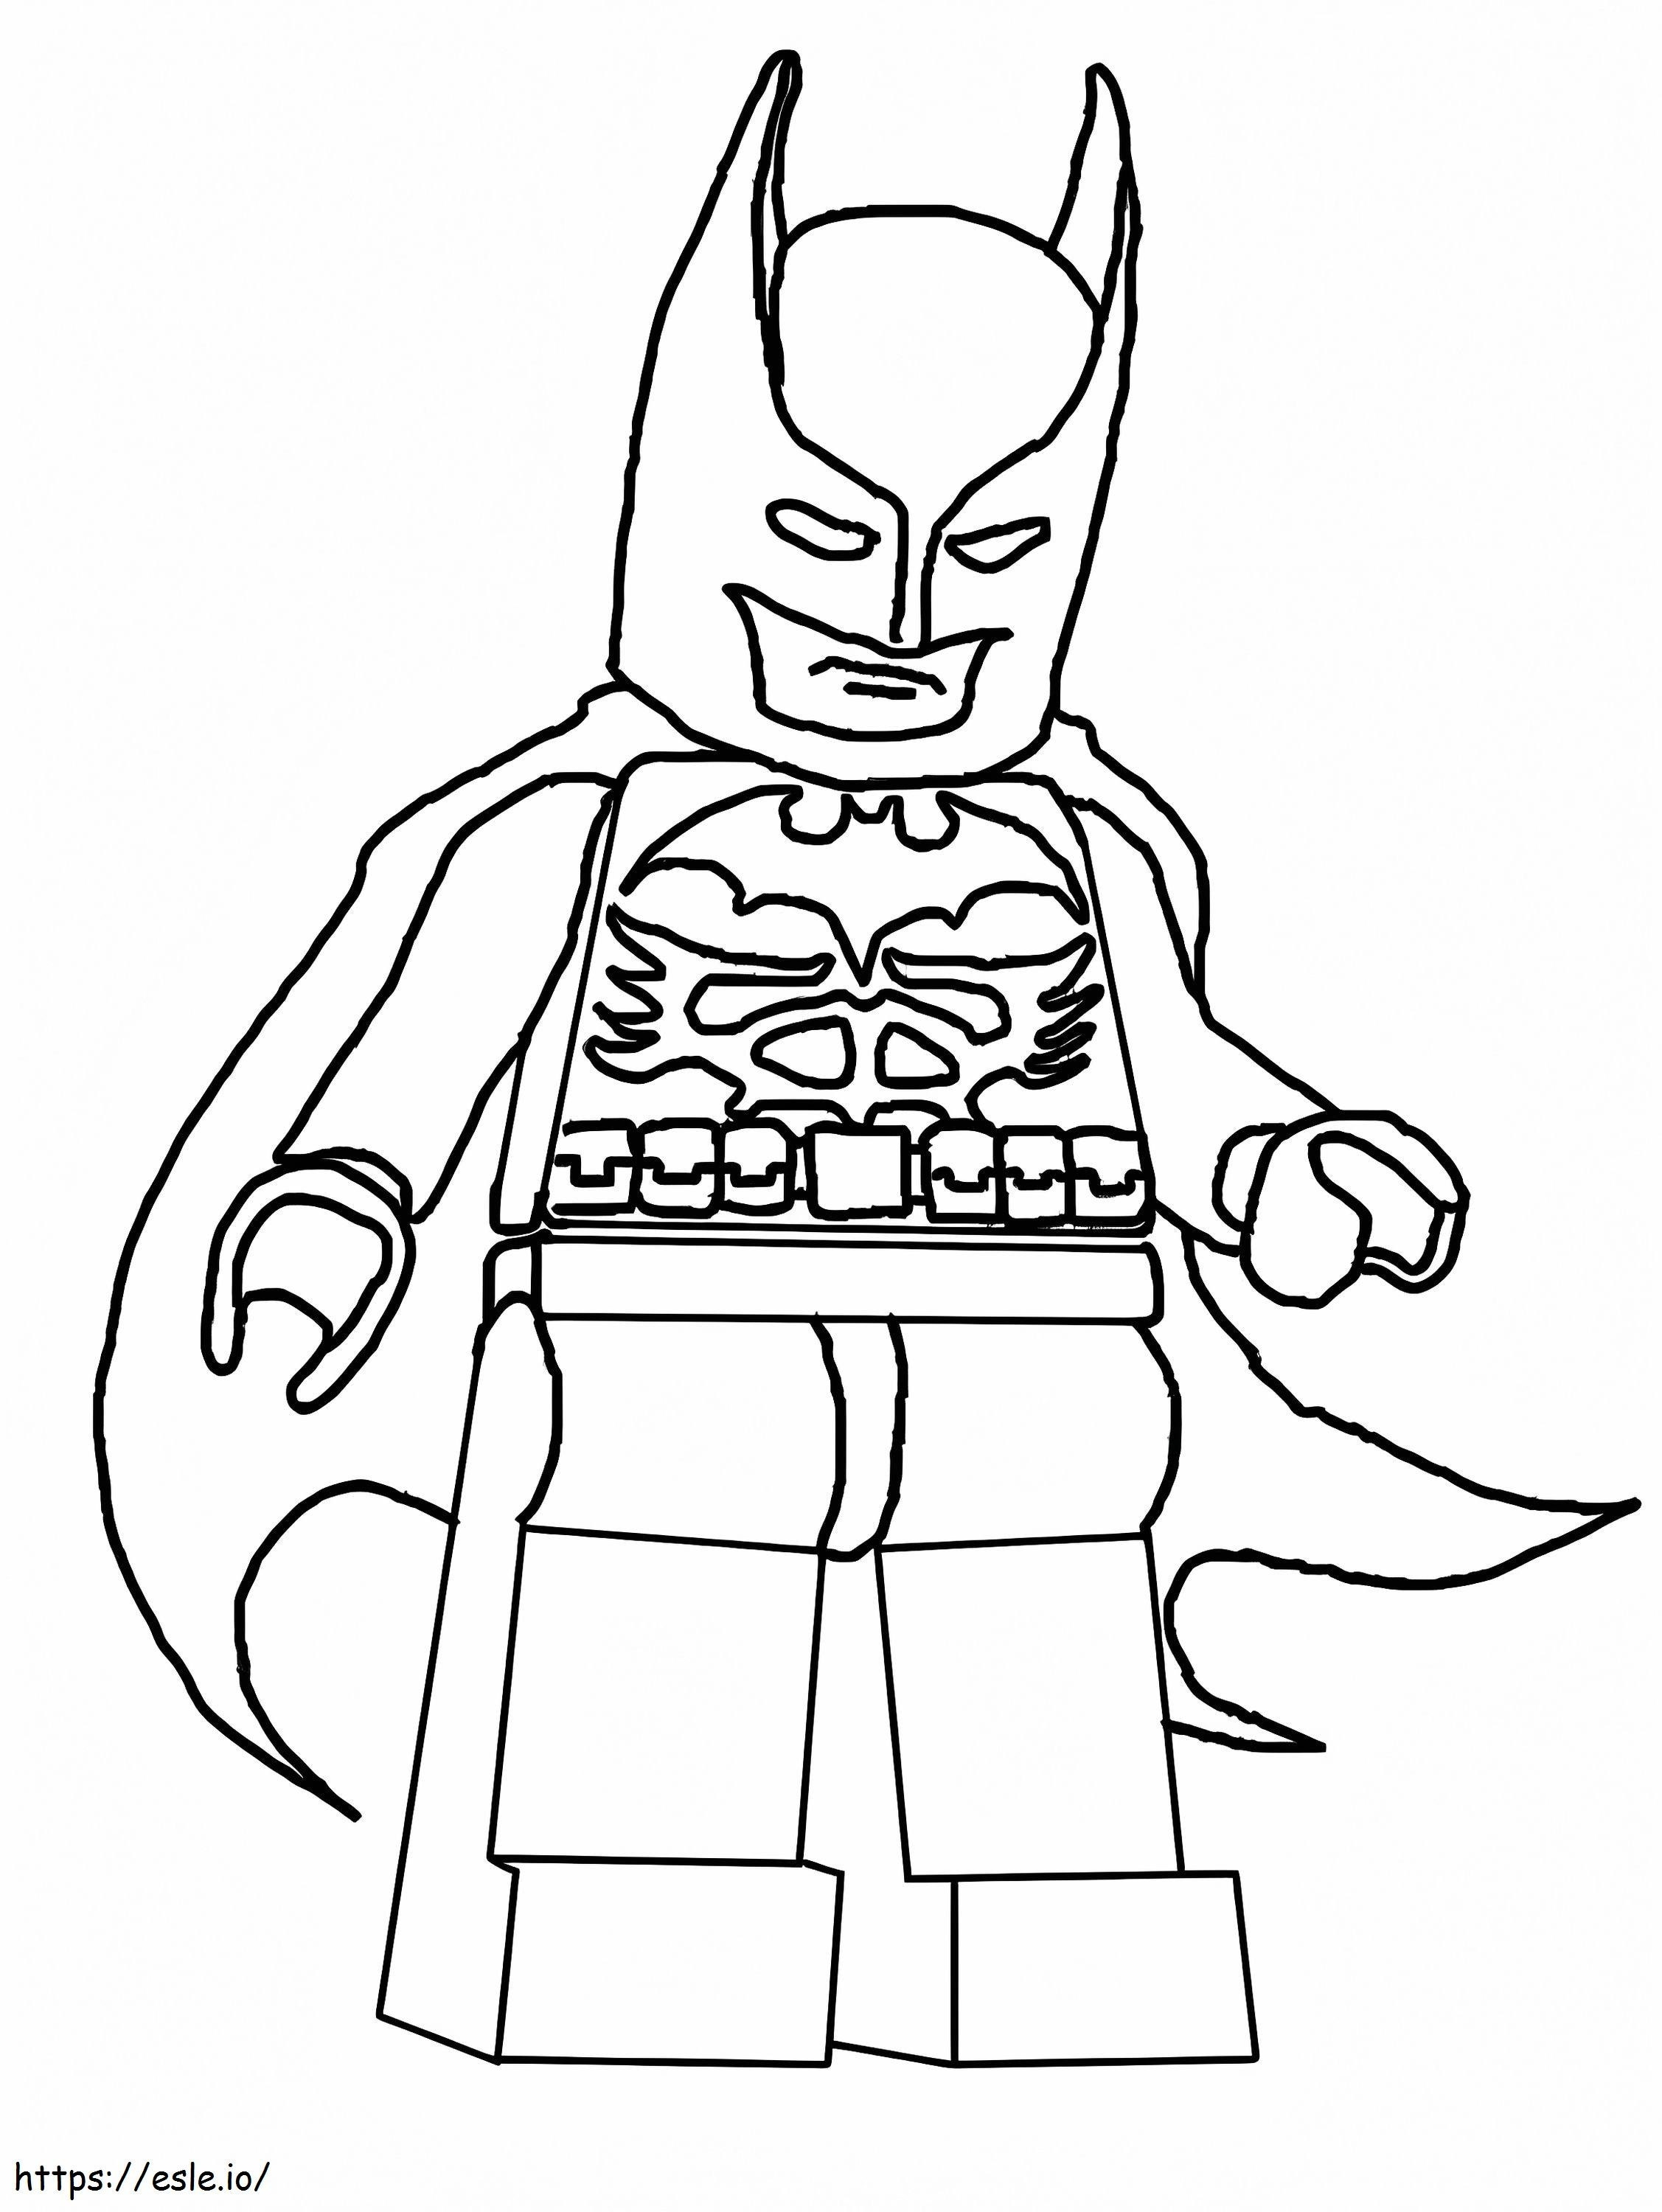 Awesome Lego Batman coloring page